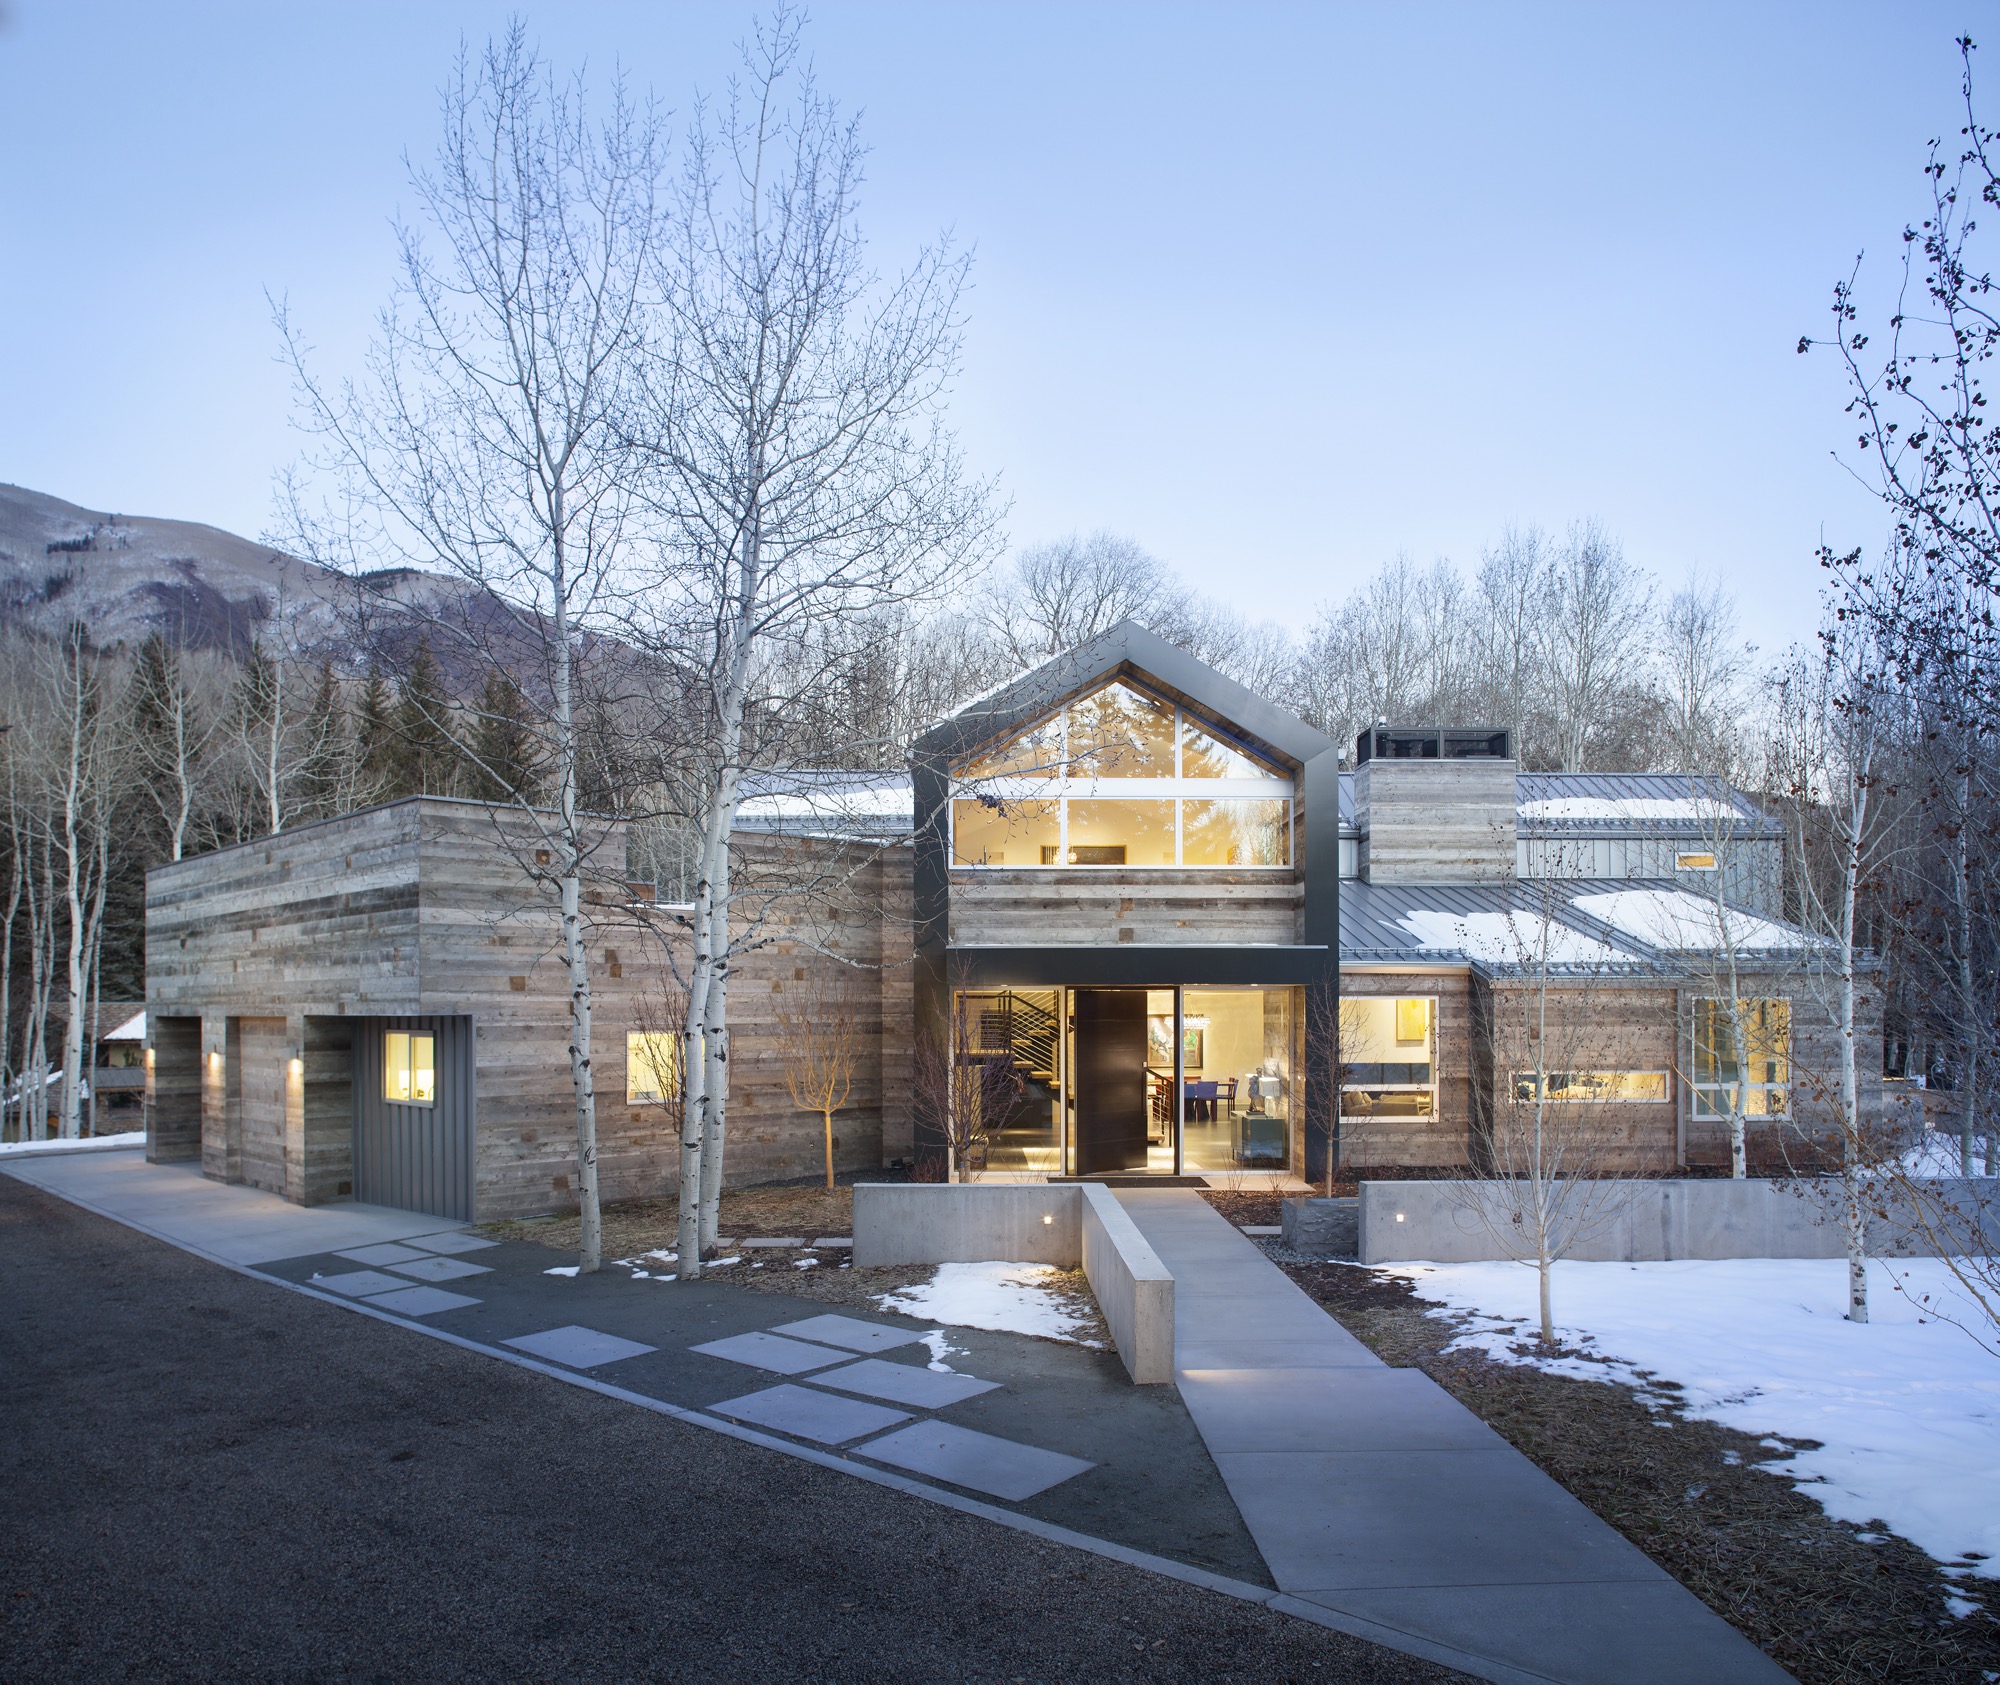 Black Birch Modern in Aspen, Colorado, by architecture and interior design firm Rowland and Broughton